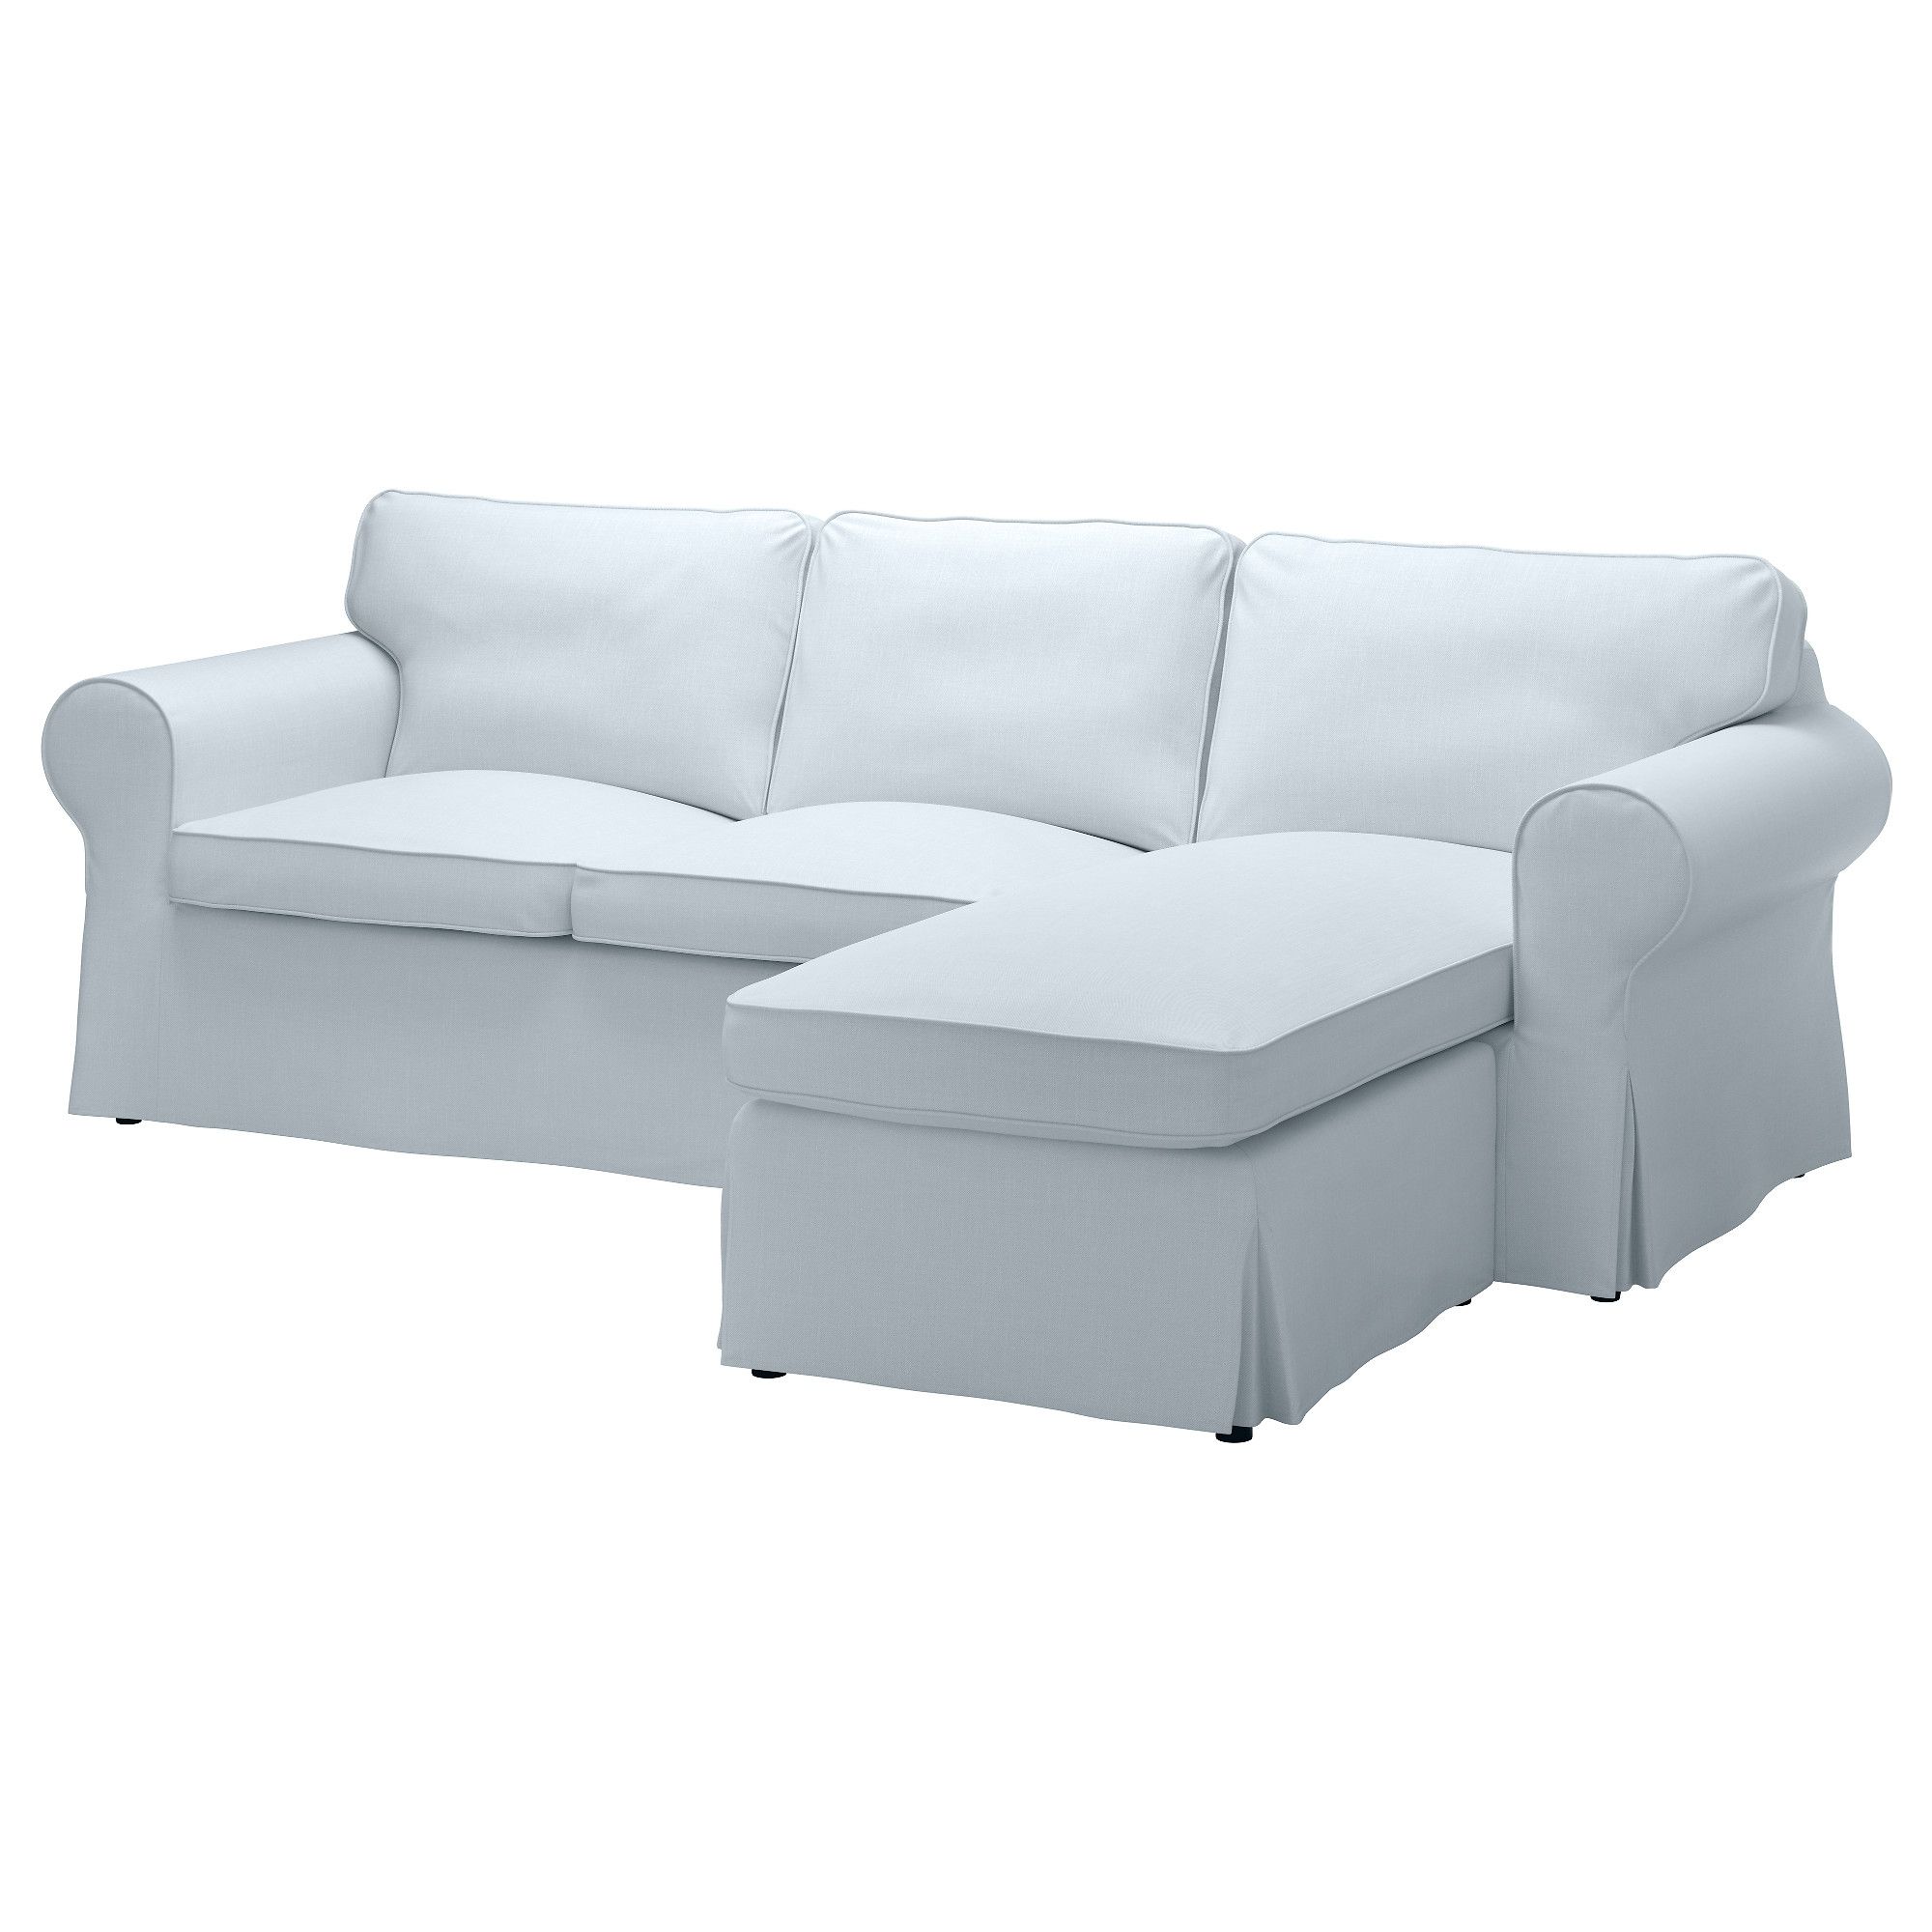 Small Sectional Sofa Ikea 80 With Small Sectional Sofa Ikea Intended For Sectional Sofas At Ikea (View 9 of 15)